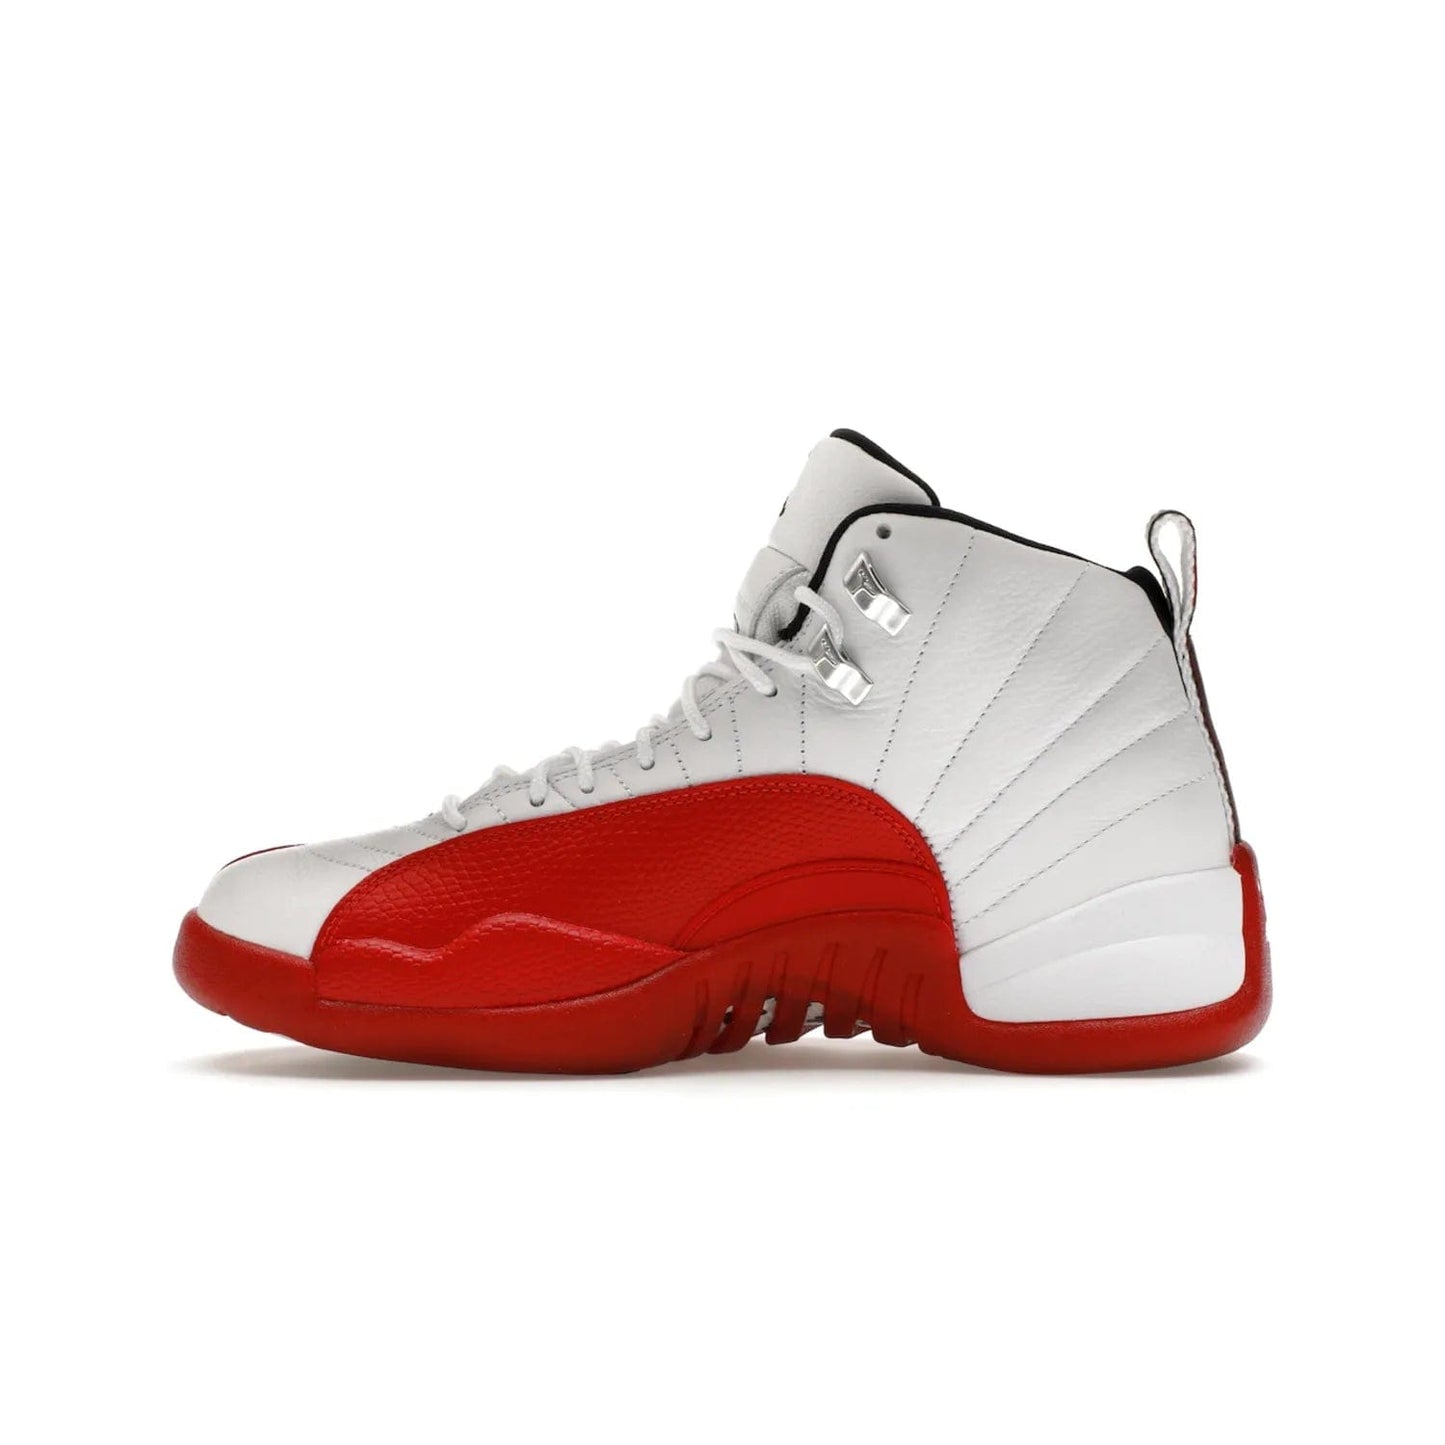 Jordan 12 Retro Cherry (2023) - Image 19 - Only at www.BallersClubKickz.com - Live your sneaker legend with the Jordan 12 Retro Cherry. Iconic pebbled leather mudguards, quilted uppers, and varsity red accents make this 1997 classic a must-have for 2023. Shine on with silver hardware and matching midsoles, and bring it all together for limited-edition style on October 28th. Step into Jordan legacy with the Retro Cherry.